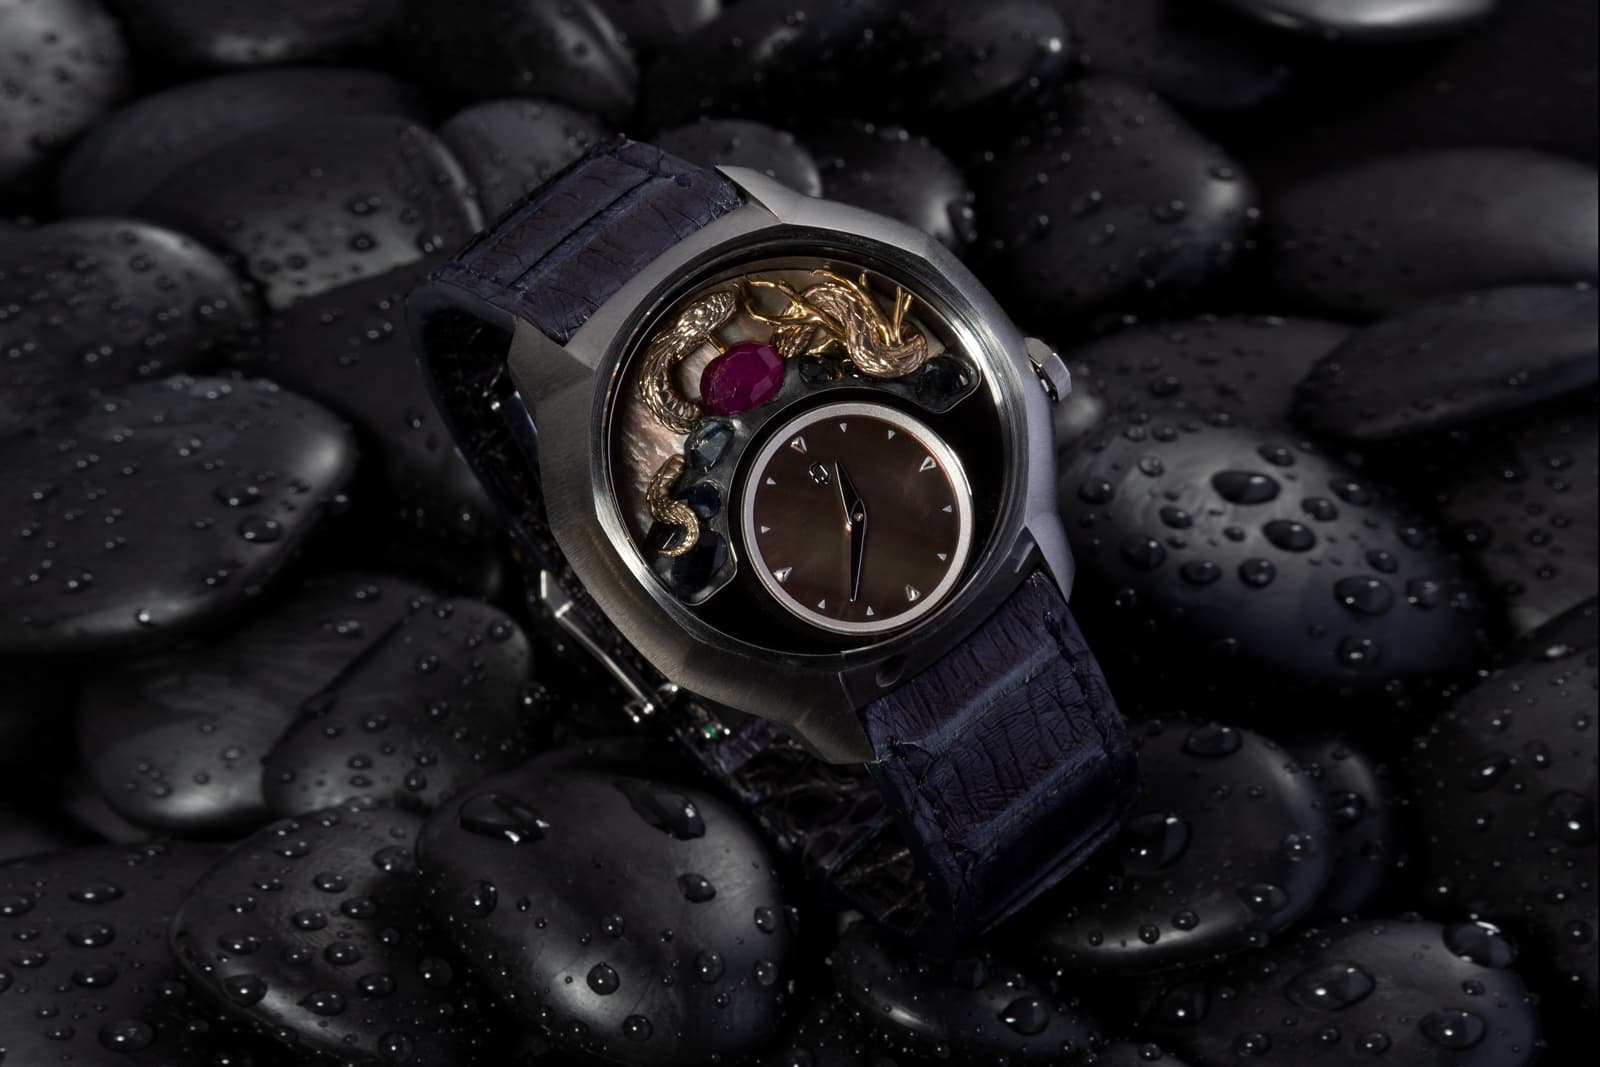 Qannati Objet d'Art First Civilisation Quantum timepiece with mother of pearl, ruby, black sapphire and gold in a titanium case